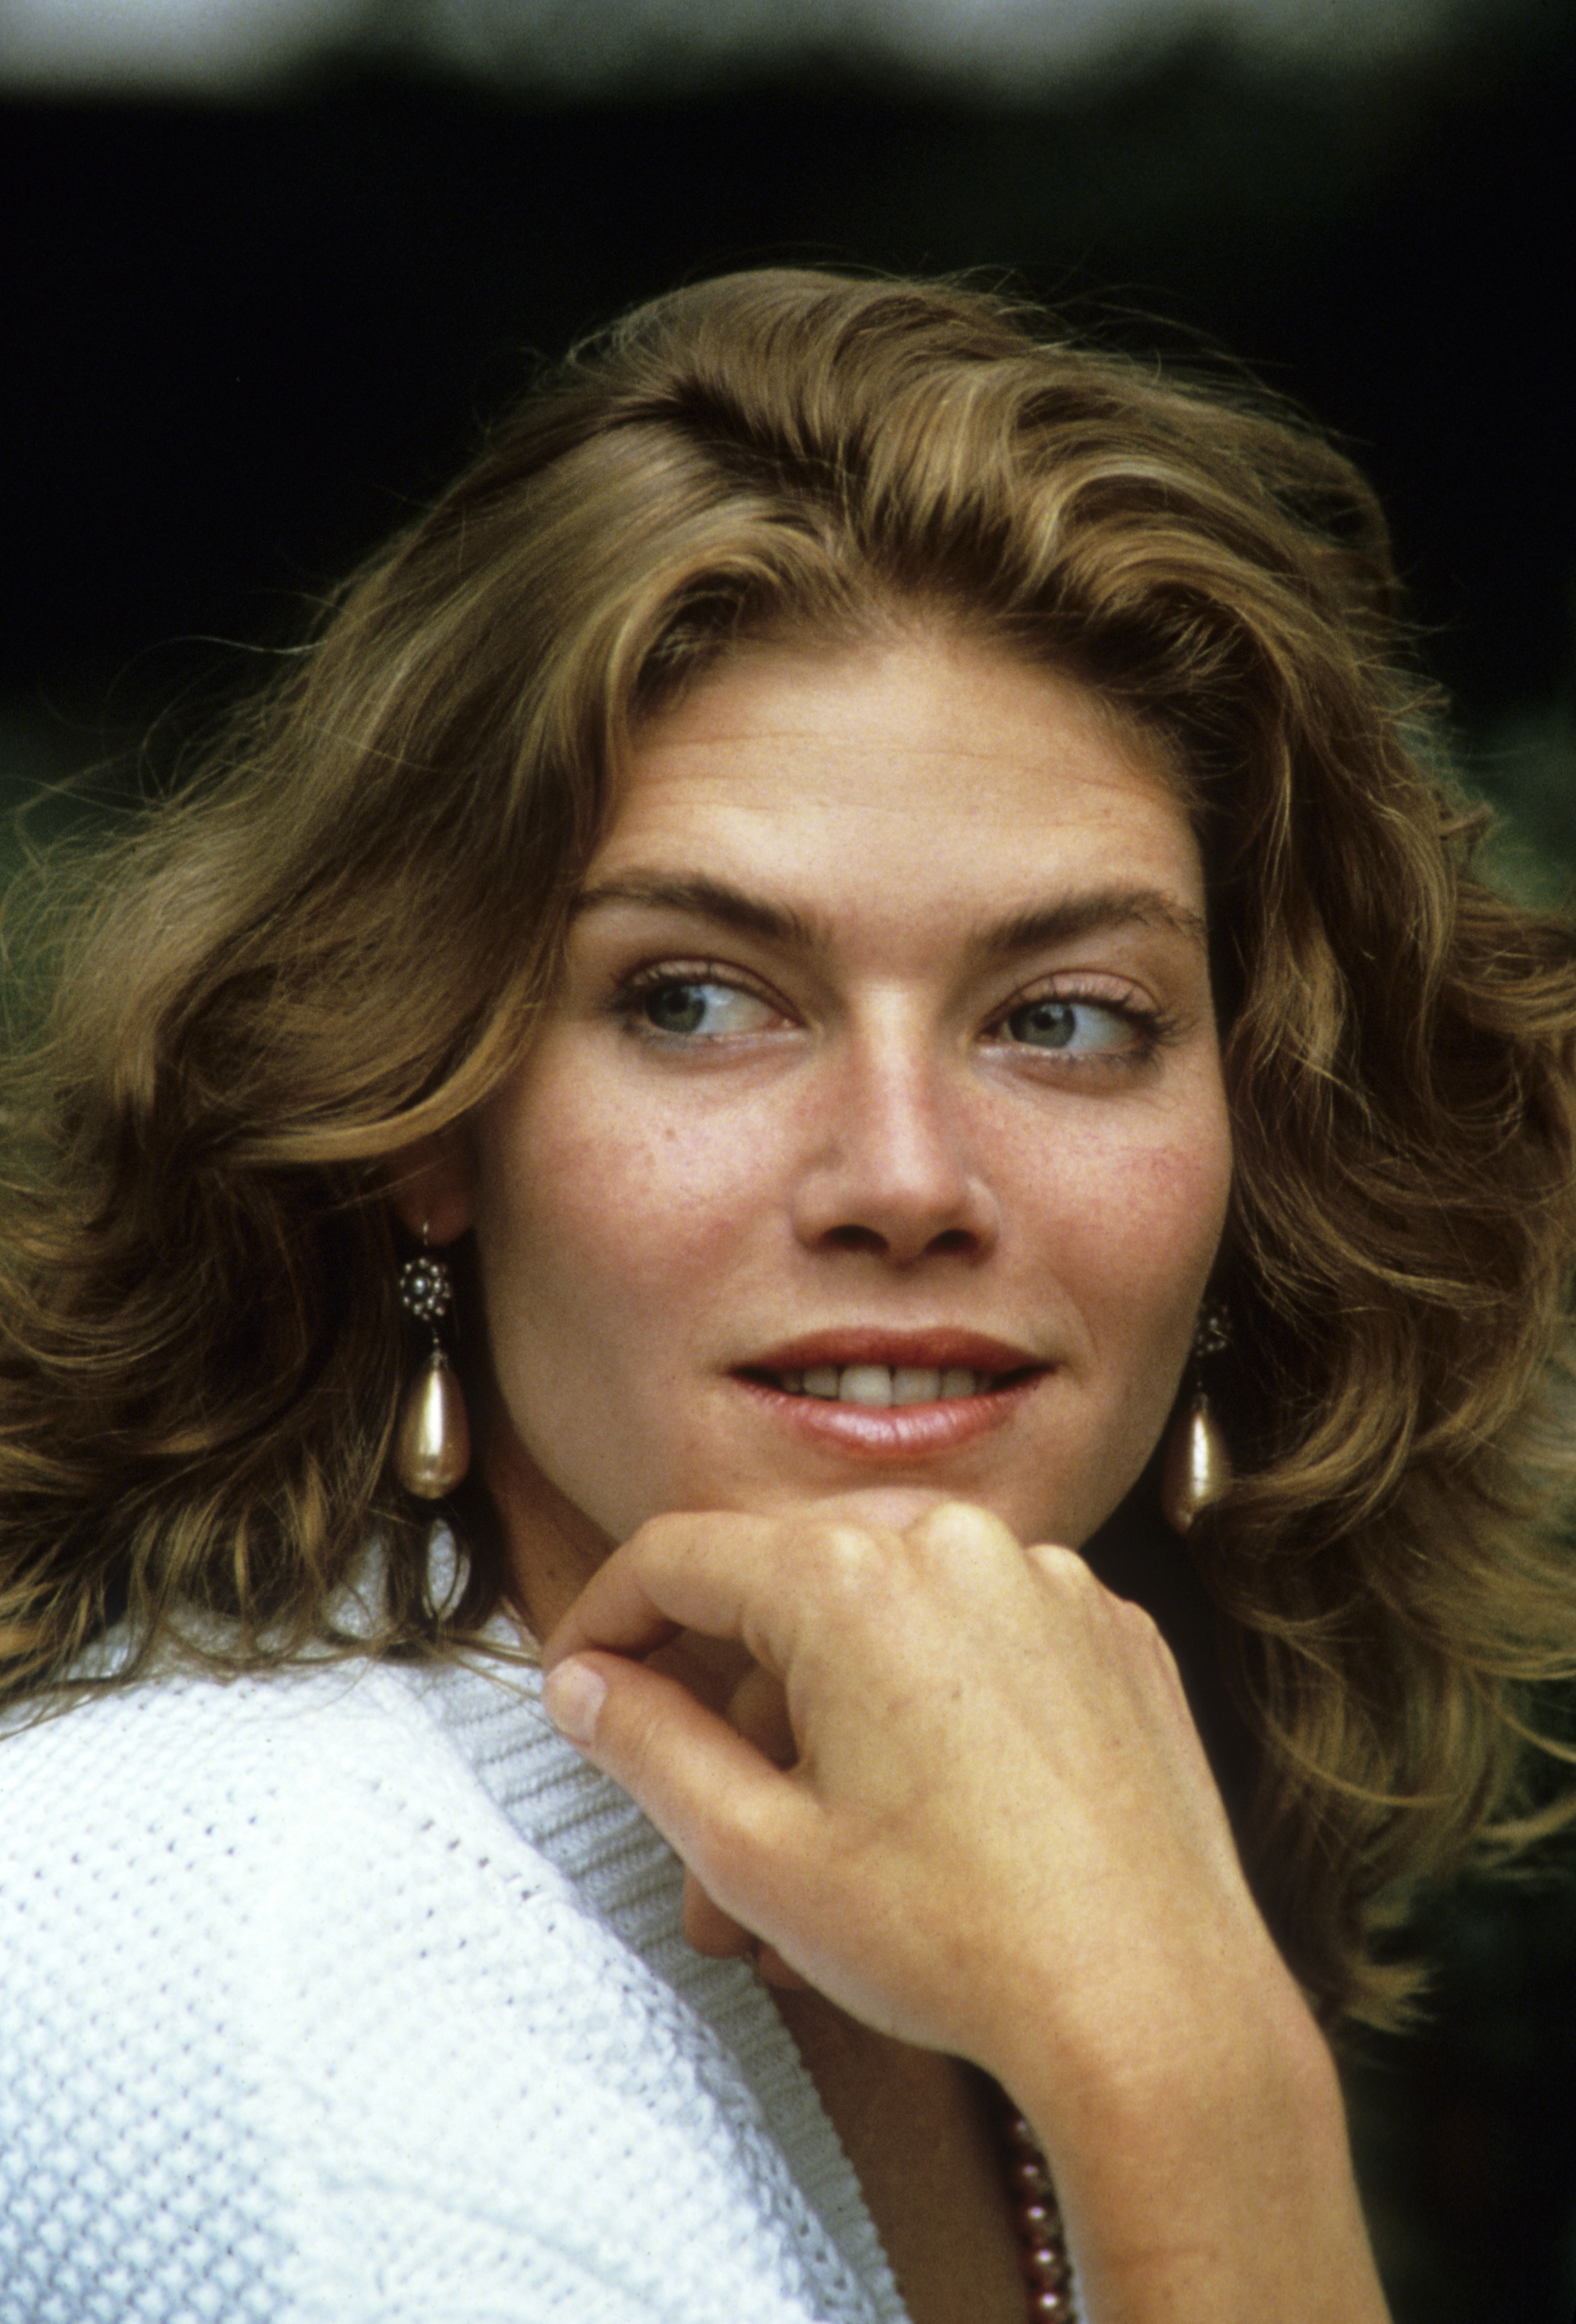 Kelly McGillis poses during a portrait session on May 15, 1985 in London, England | Source: Getty Images